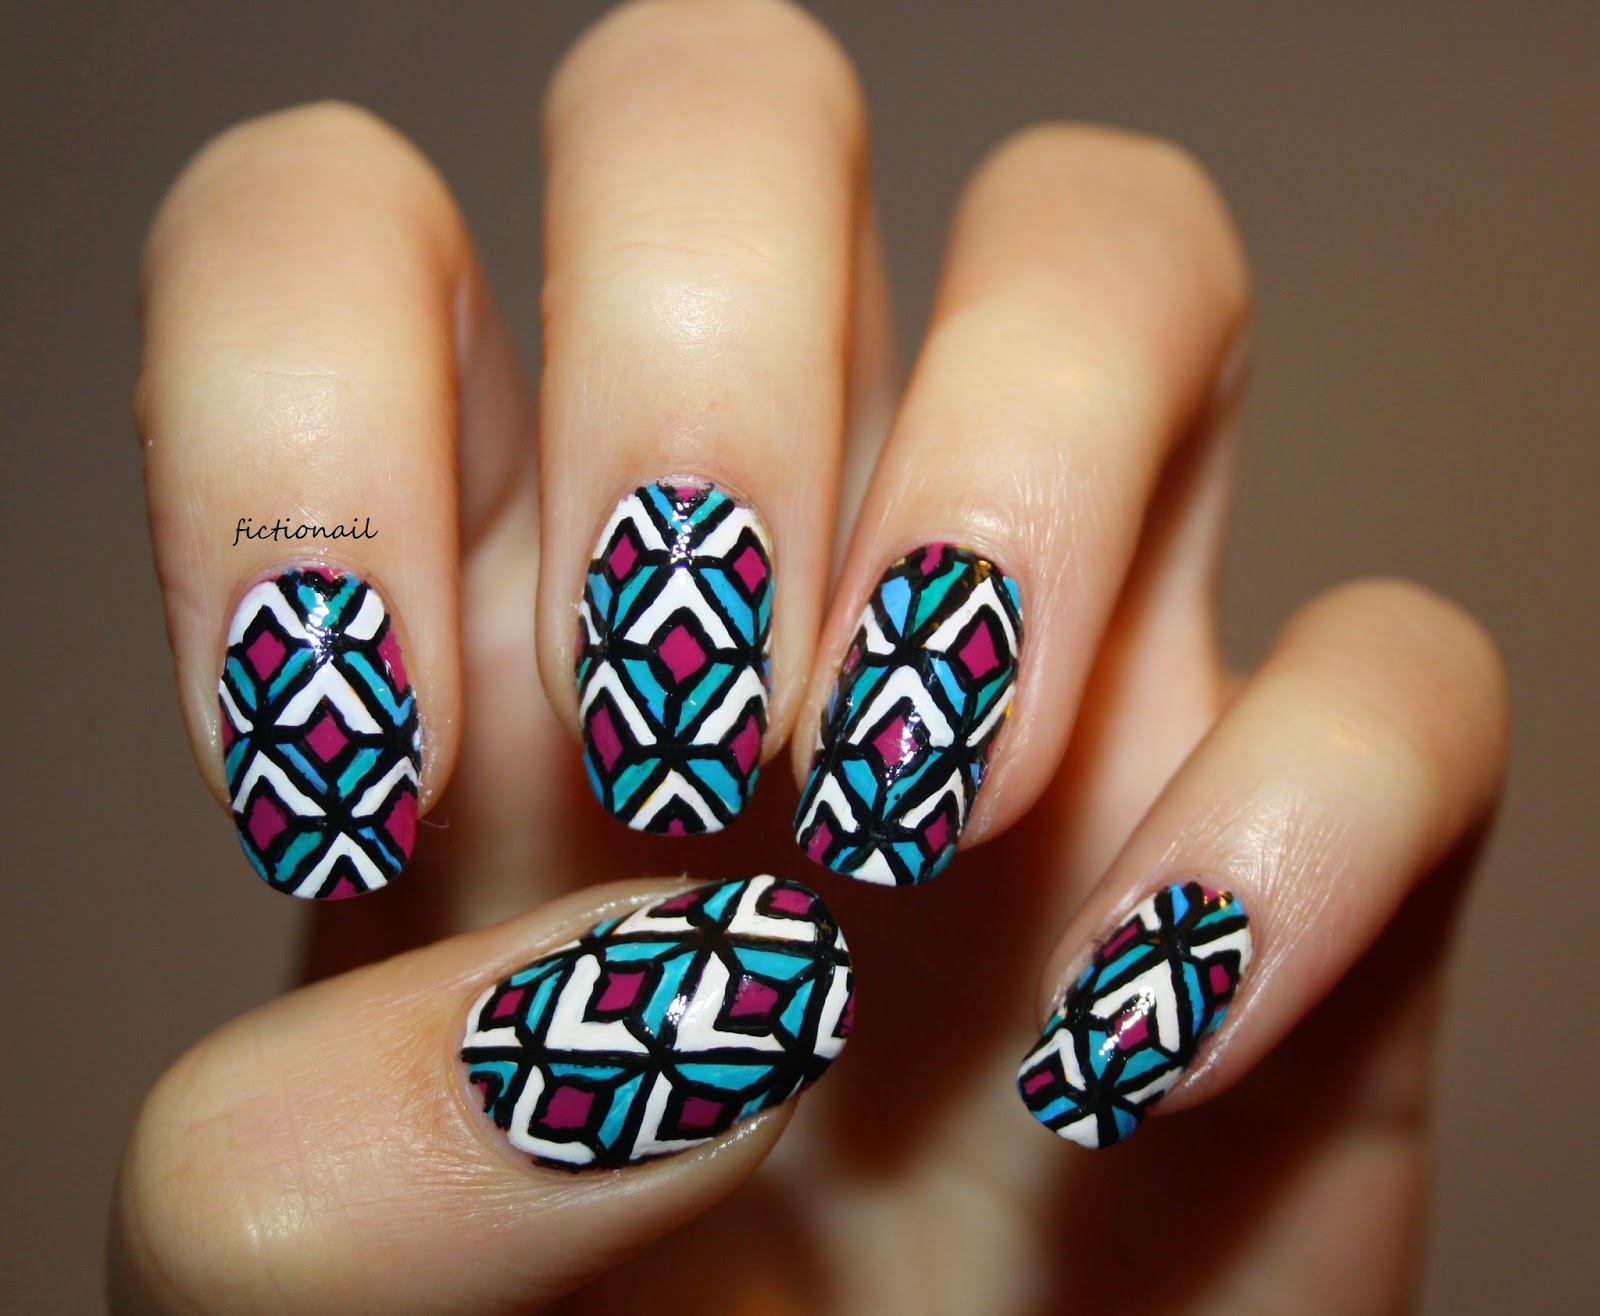 3. Sweater Pattern Nails - wide 1